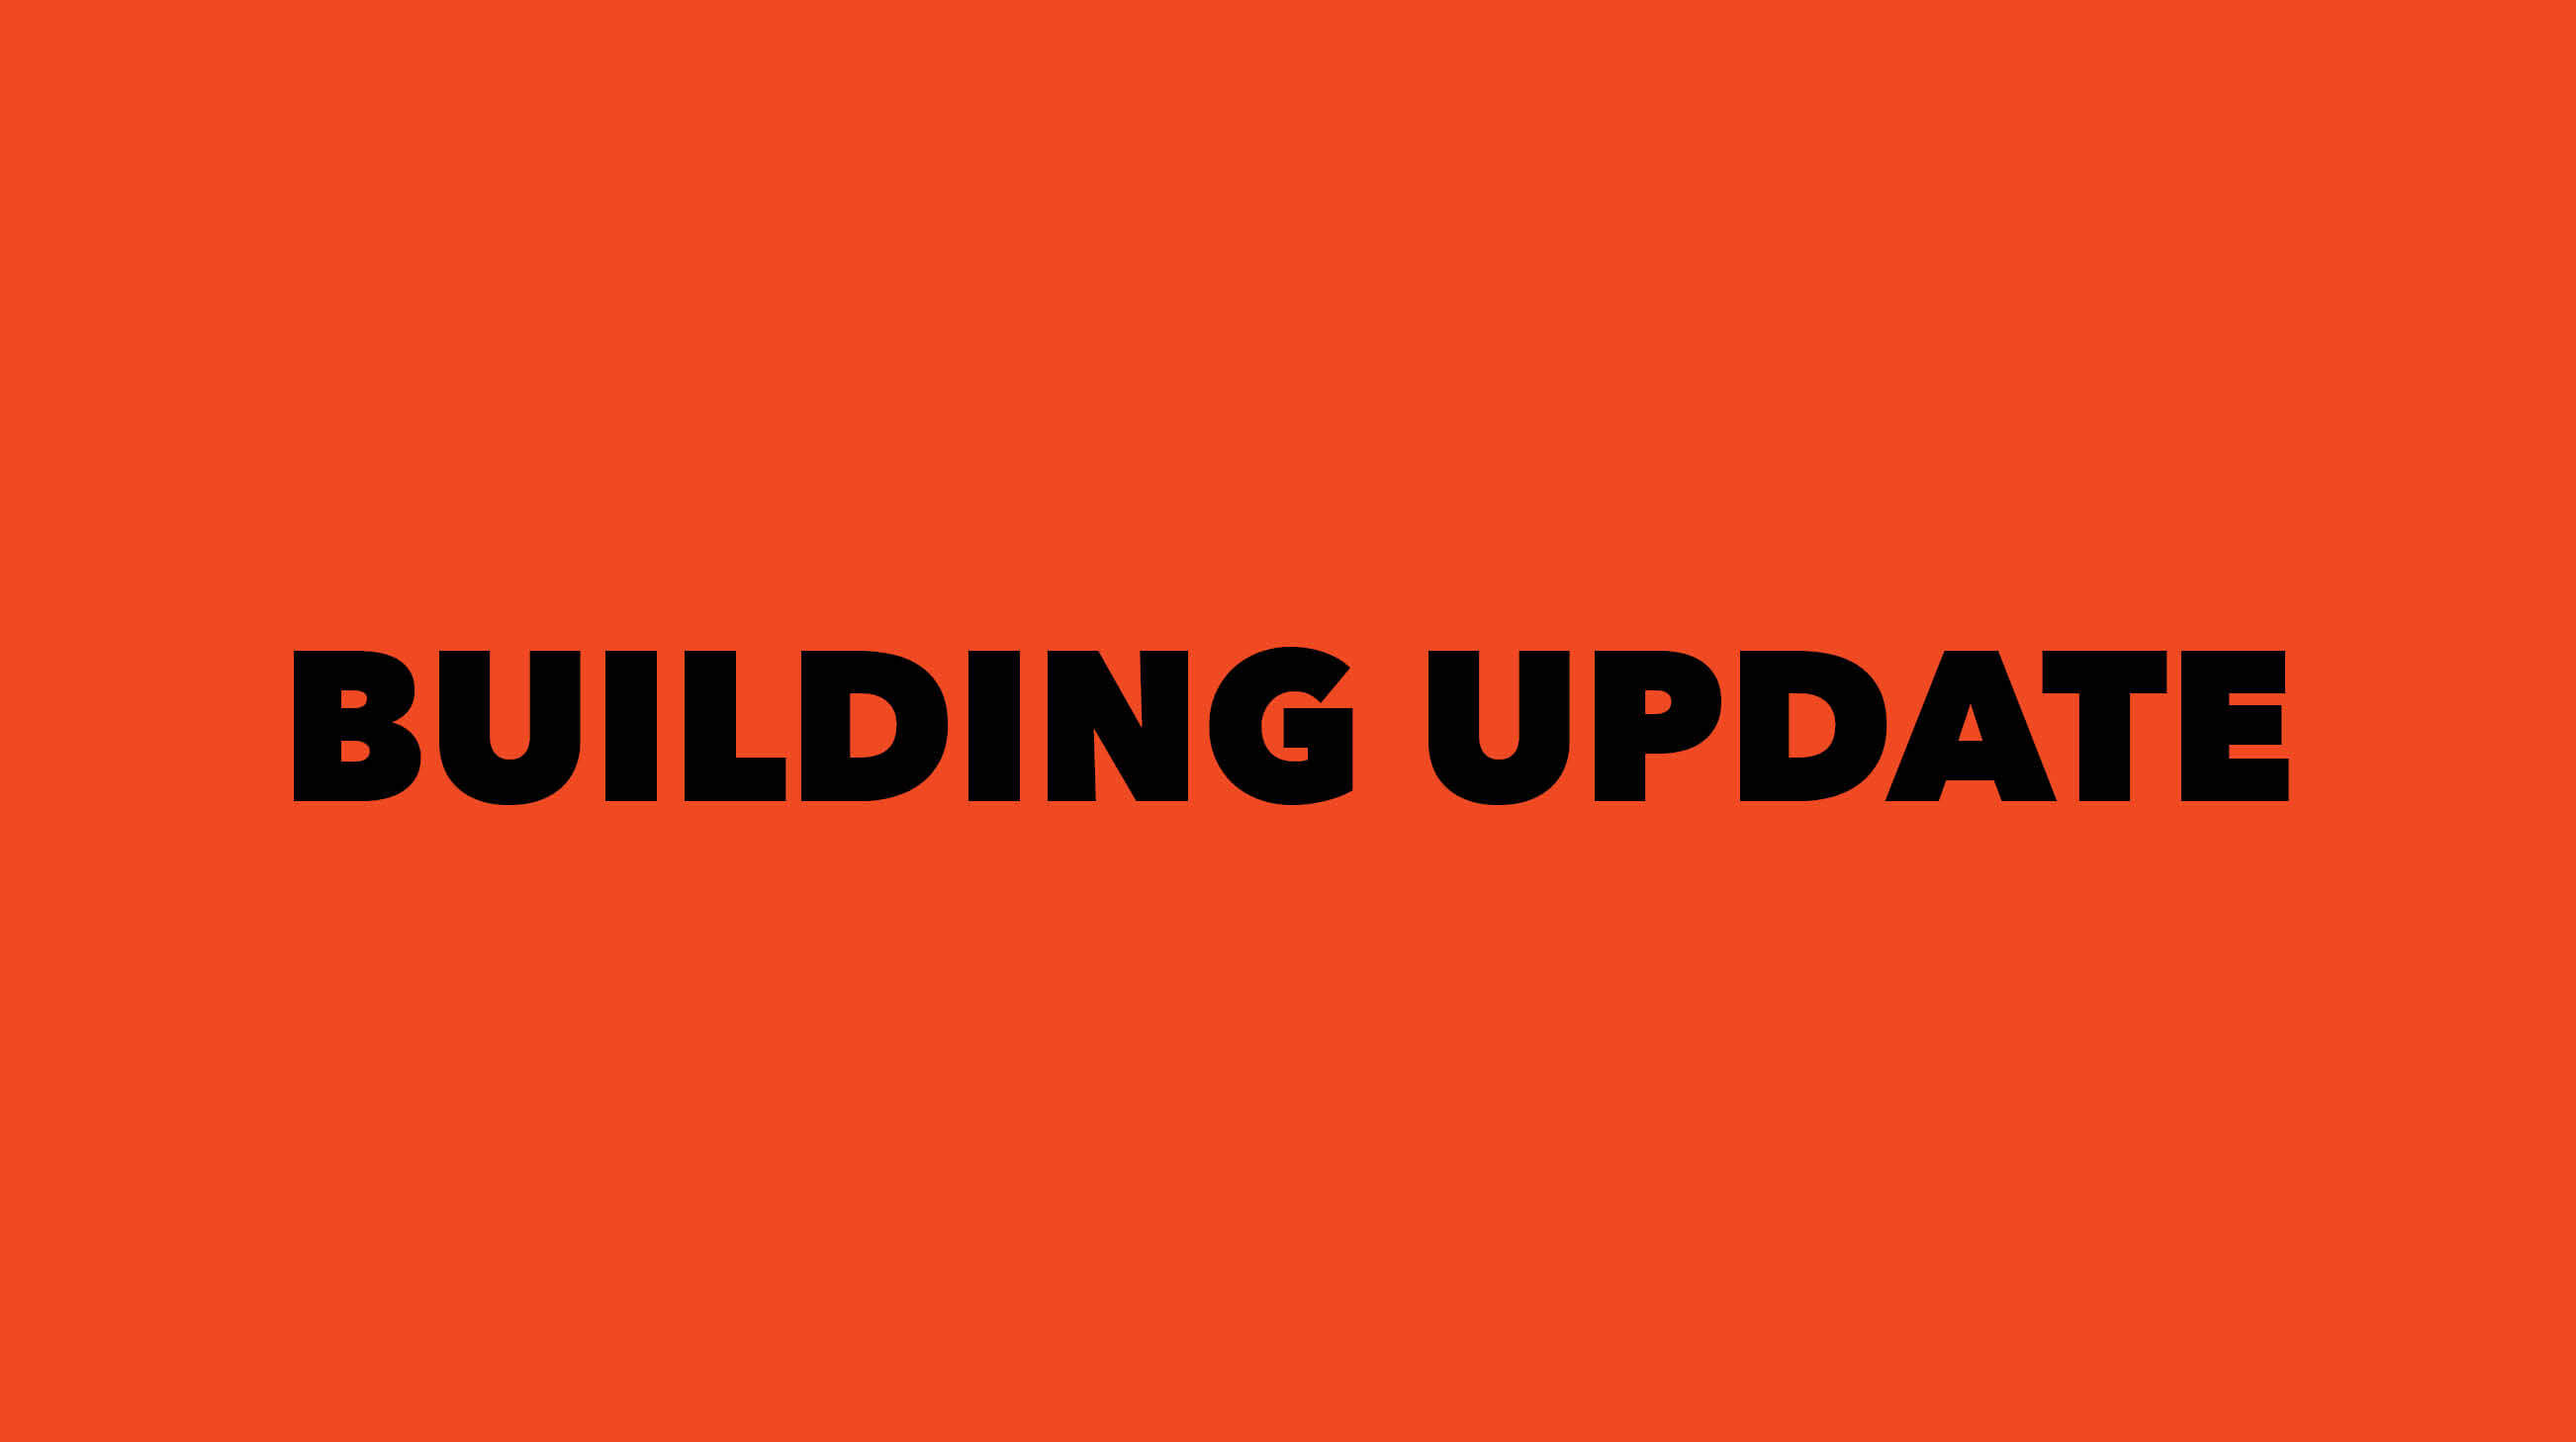 text reads "Building Update"